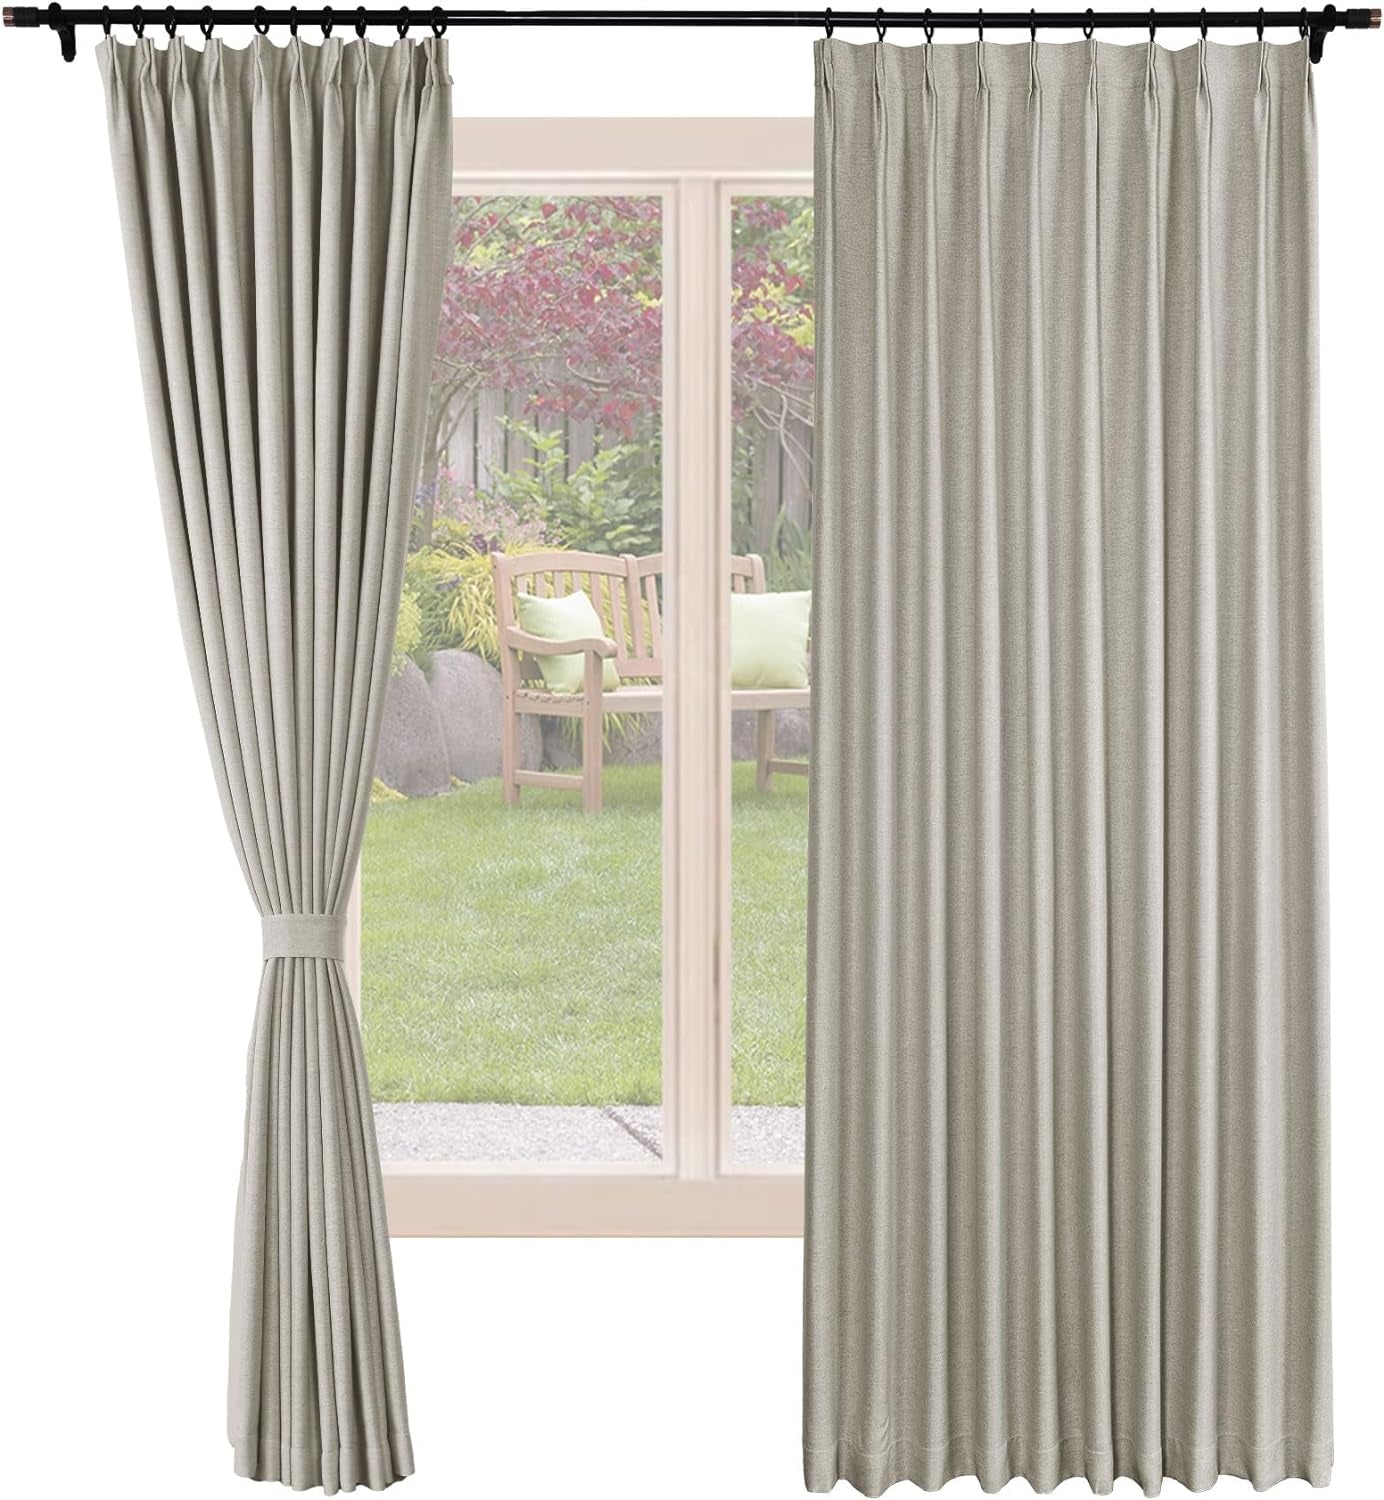 Frelement Blackout Curtains Natural Linen Curtains Pinch Pleat Drapery Panels for Living Room Thermal Insulated Curtains, 52" W X 63" L, 2 Panels, Oasis  Frelement 03 Light Grey (52Wx96L Inch)*2 